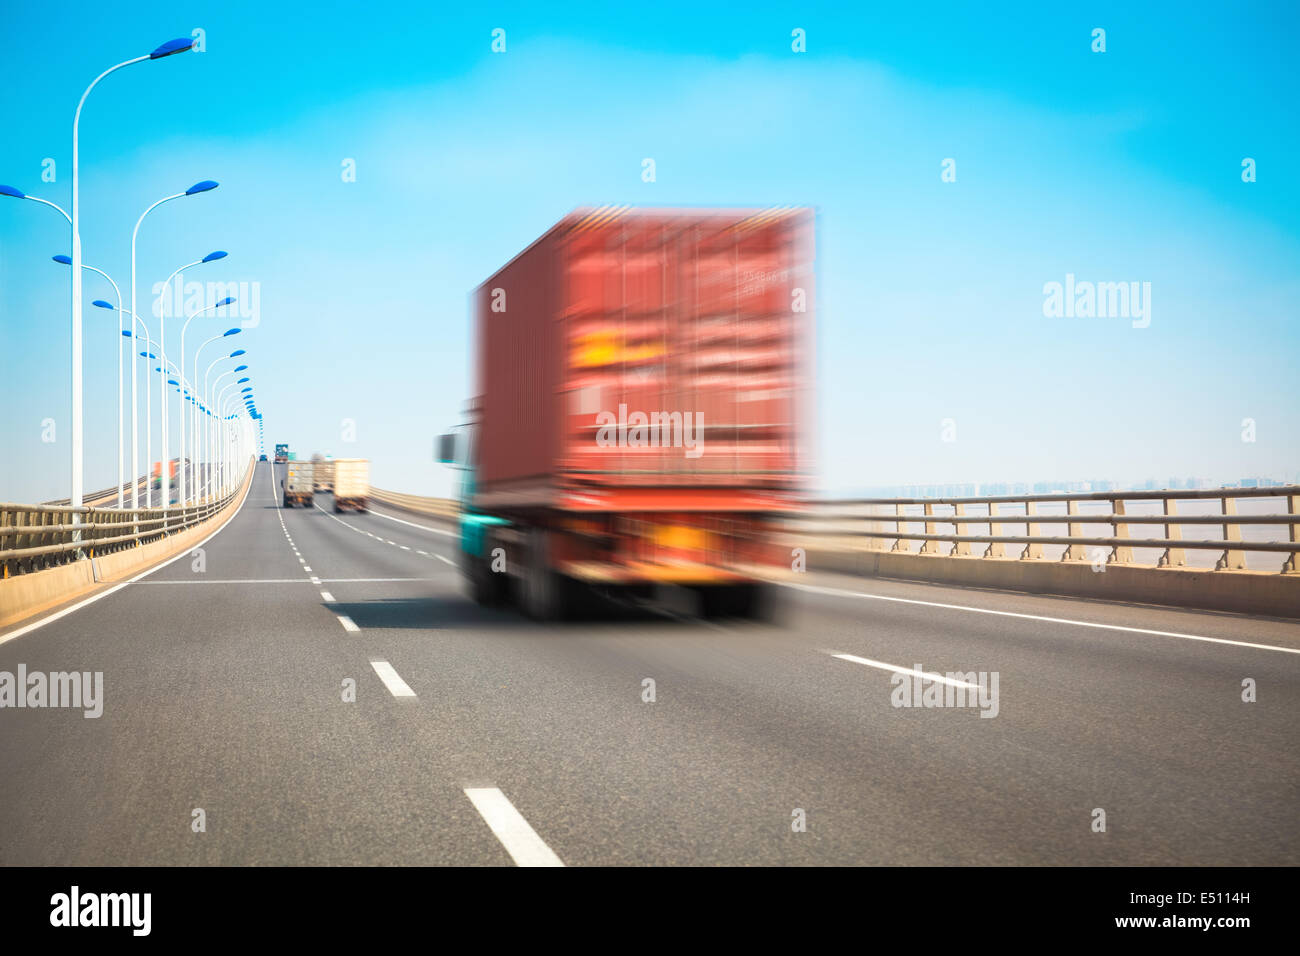 container truck on the highway bridge Stock Photo